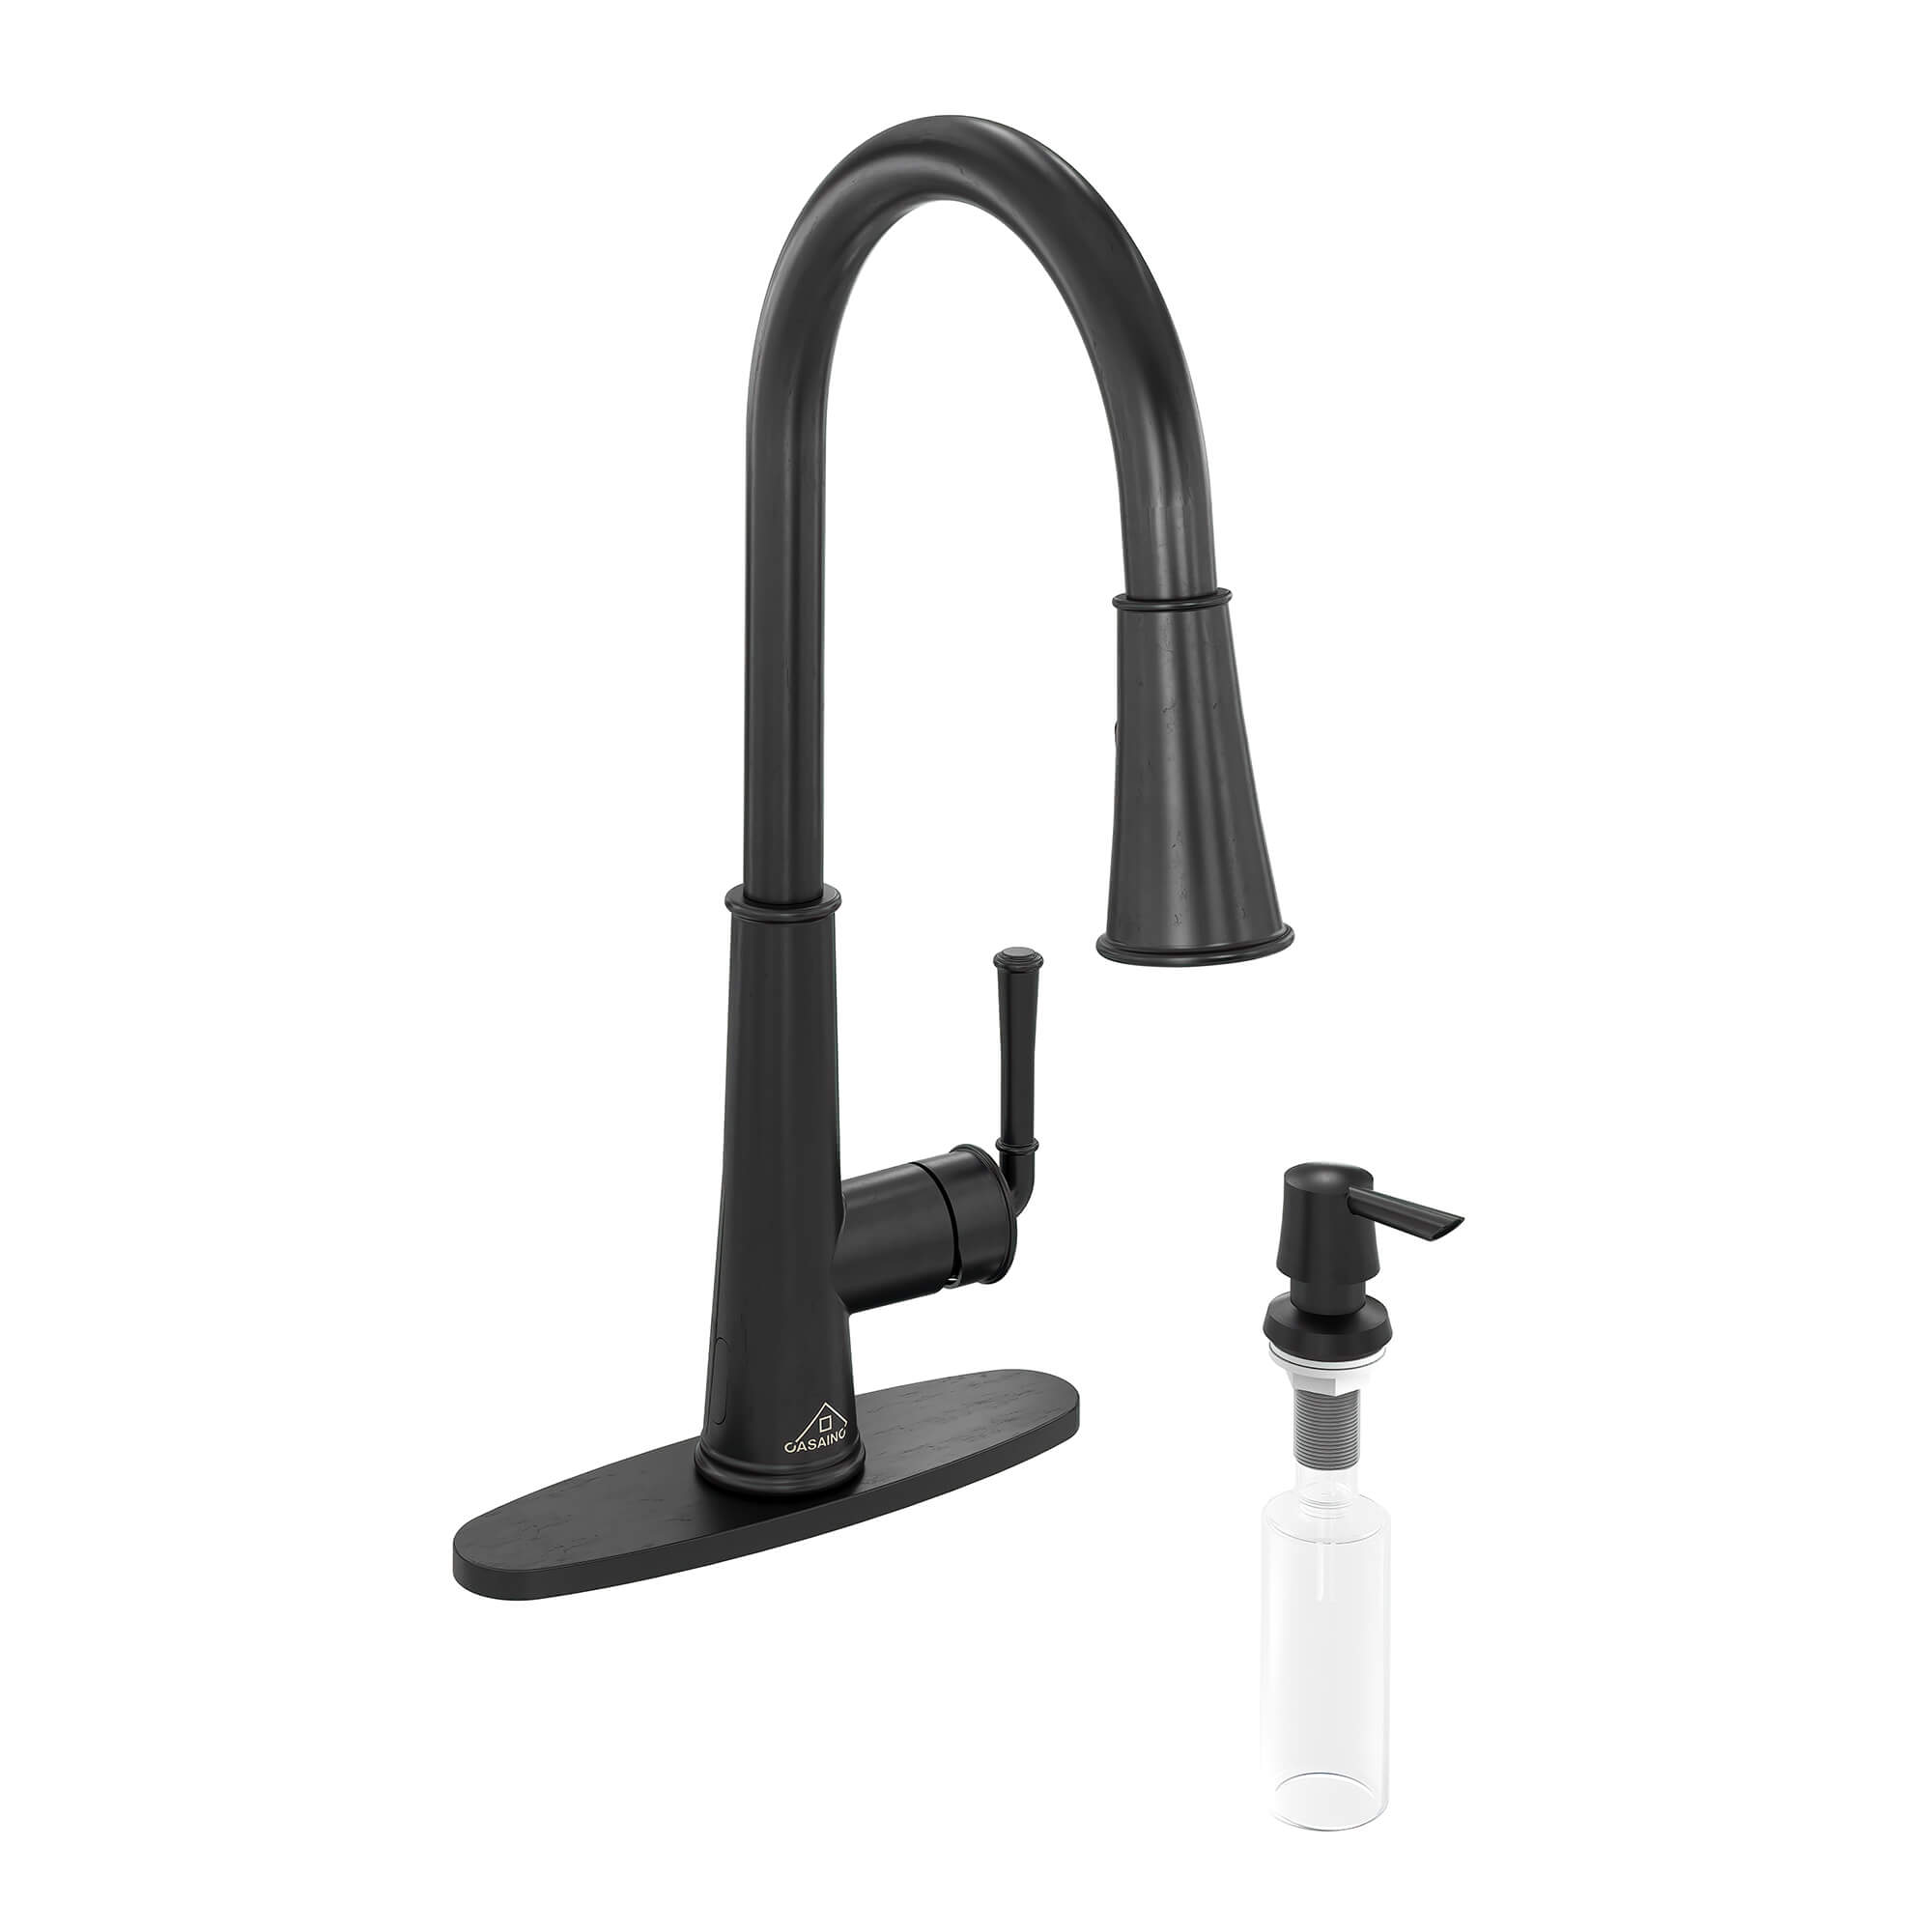 CASAINC Infrared Induction touchless pull down single handle Kitchen Faucet With LED Function in Matte Black/1.8gpm, soap dispenser contain-CASAINC